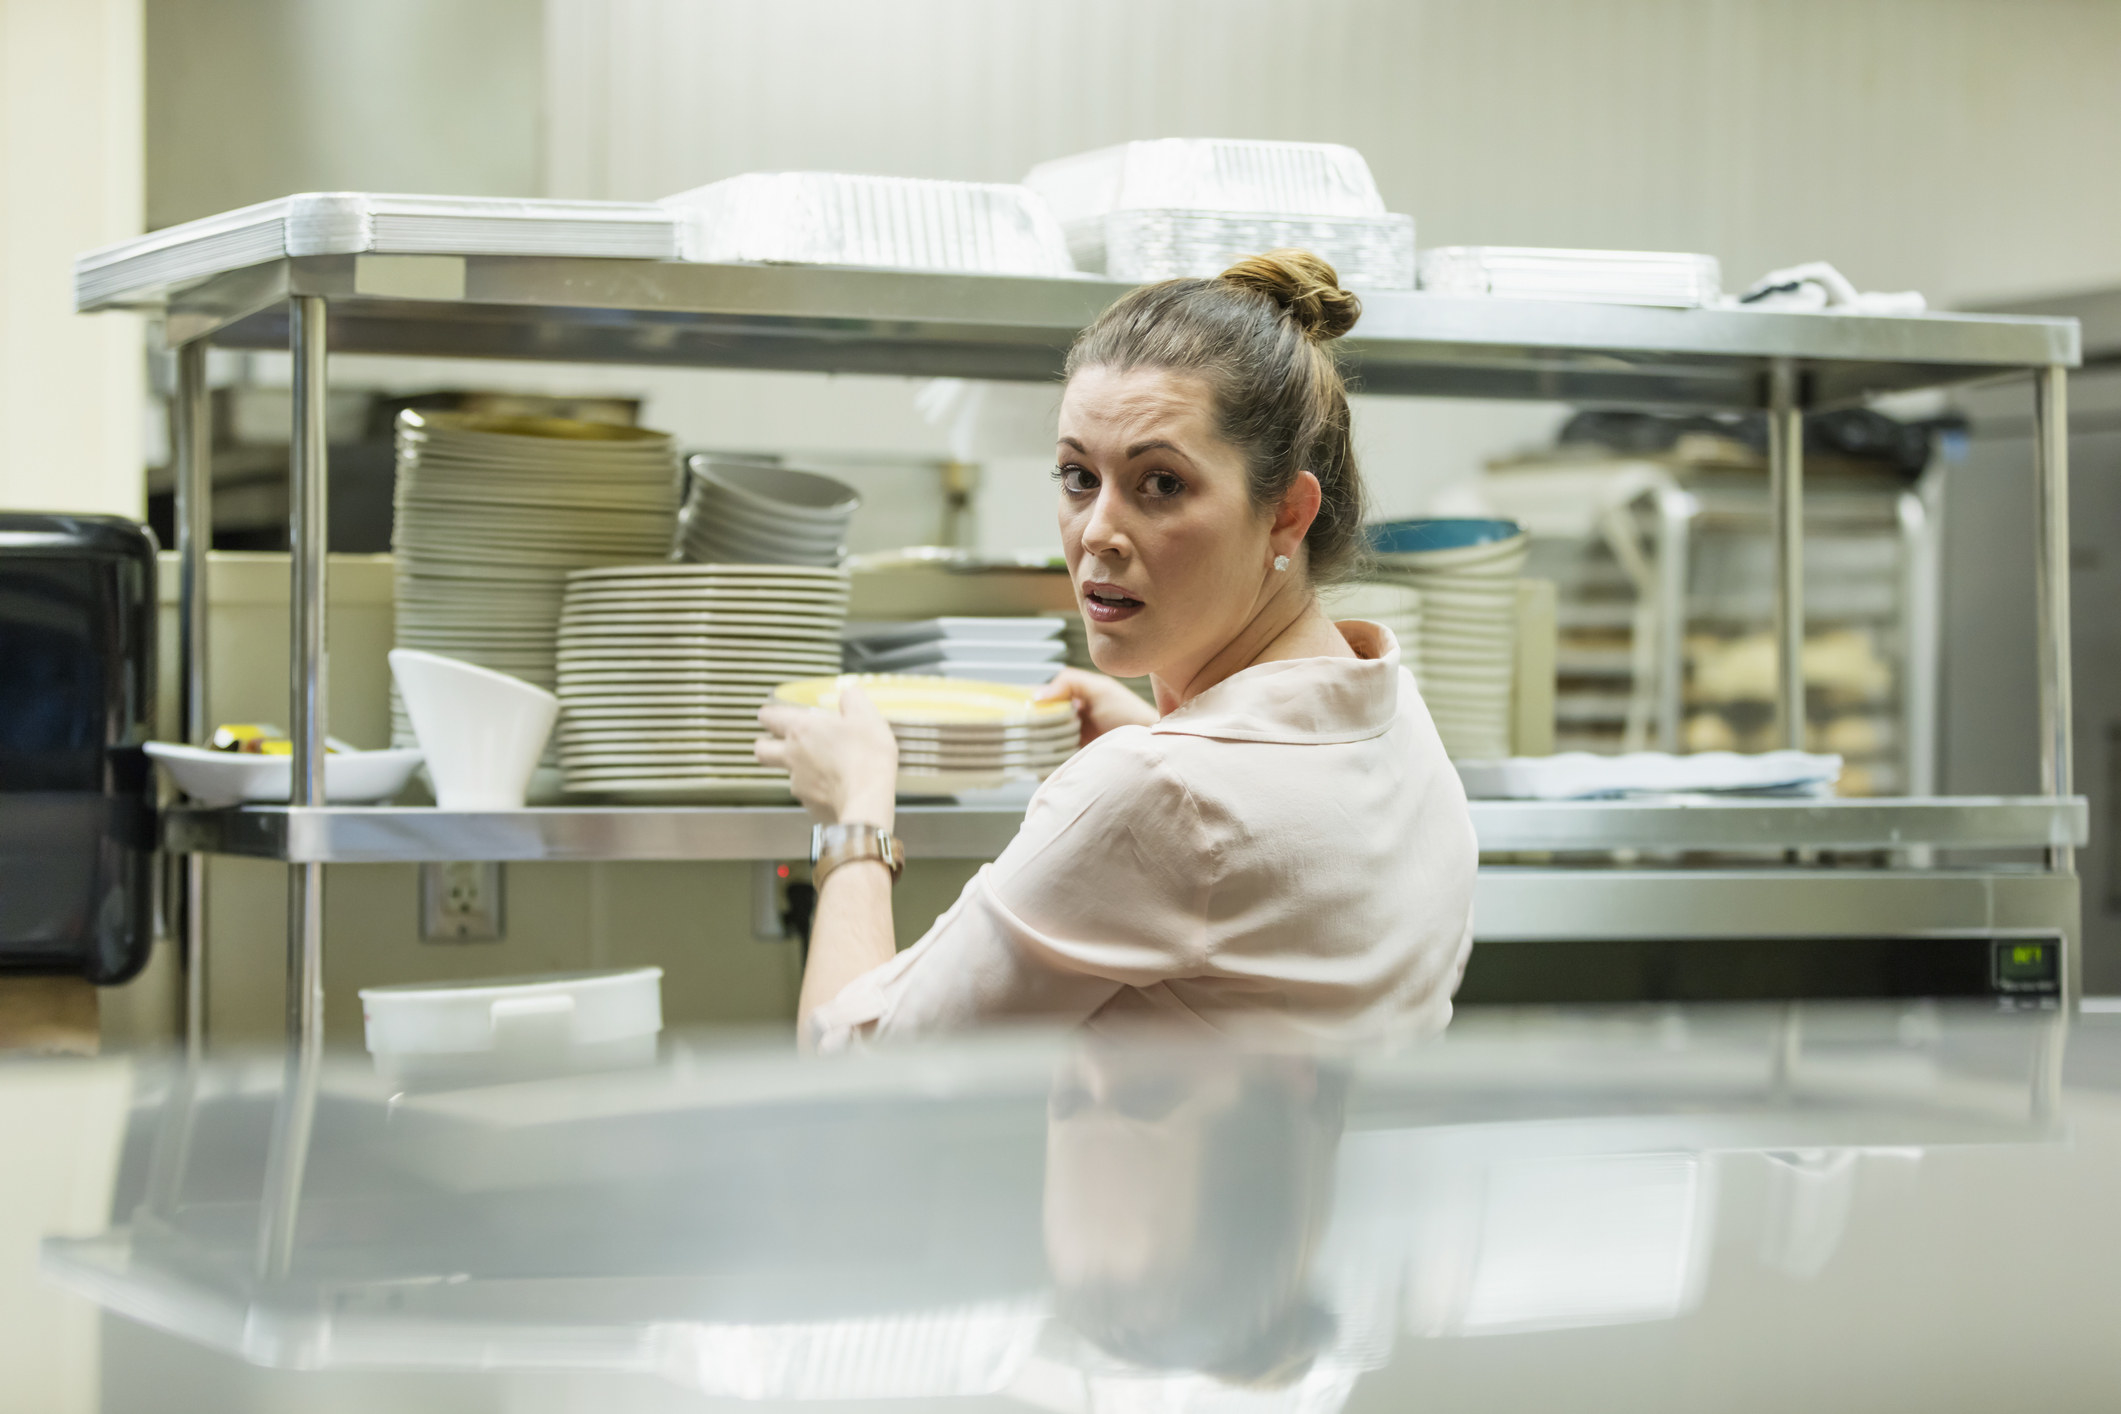 A server looking stressed out in a kitchen while grabbing plates